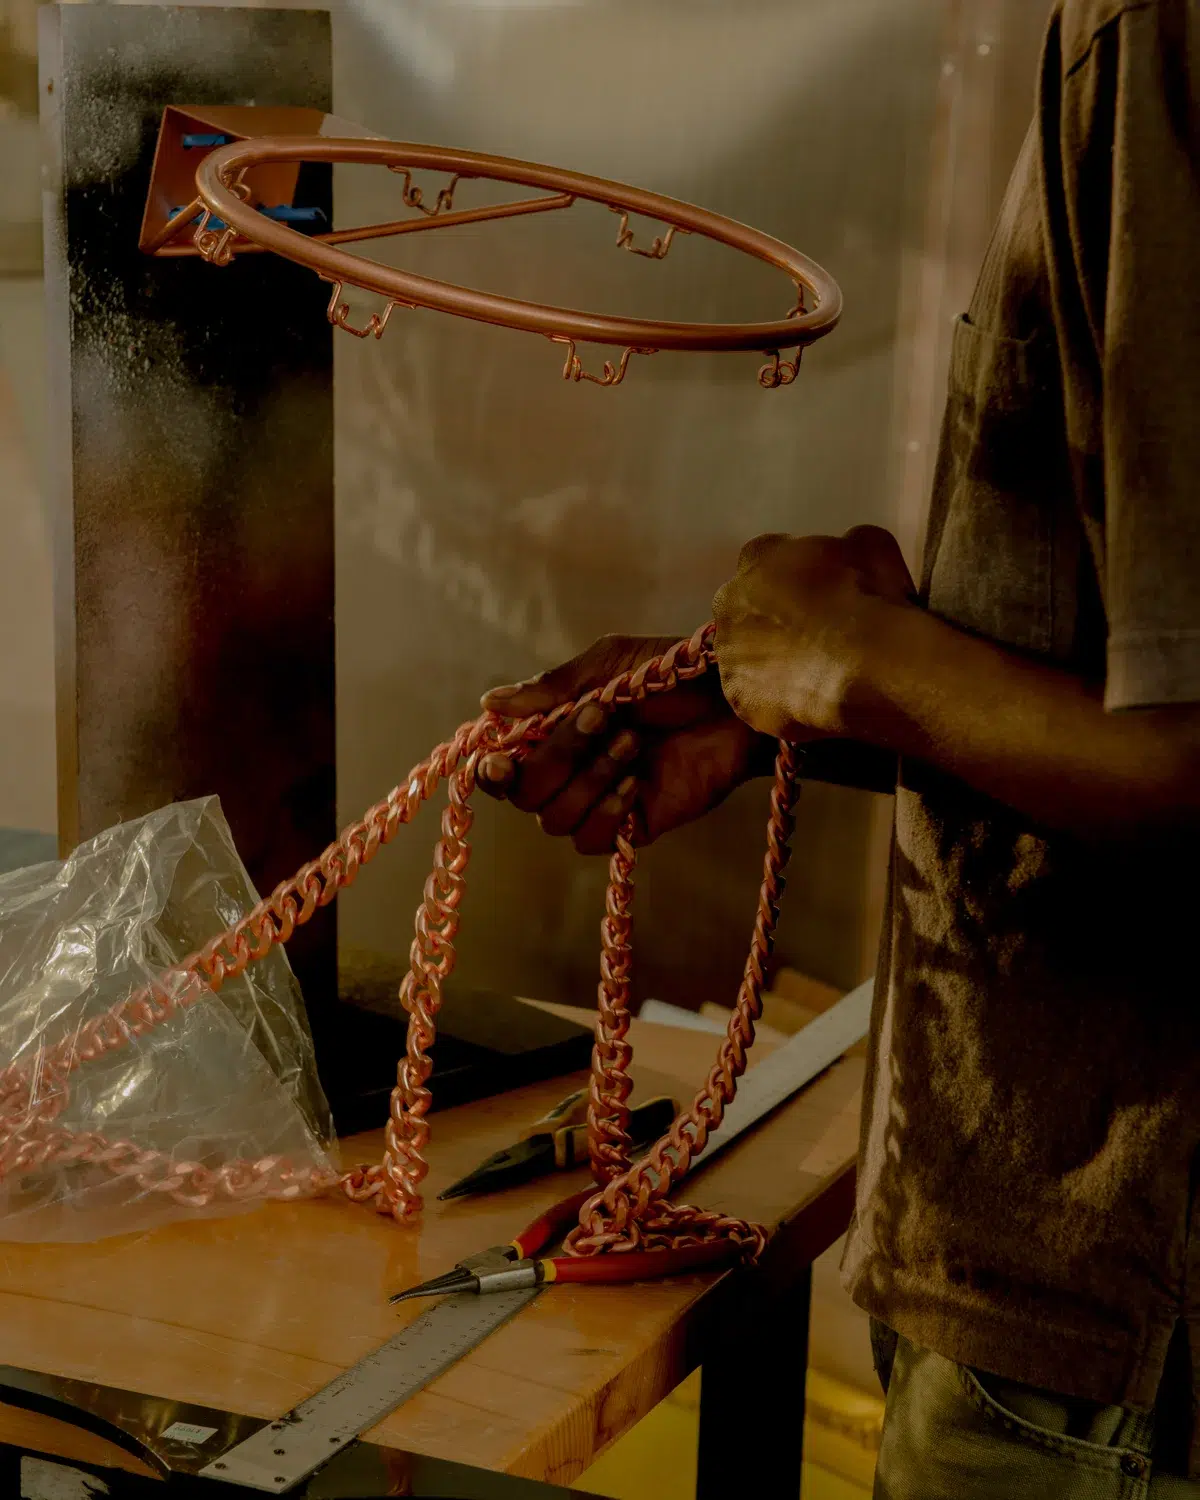 About a man working on a basketball hoop.